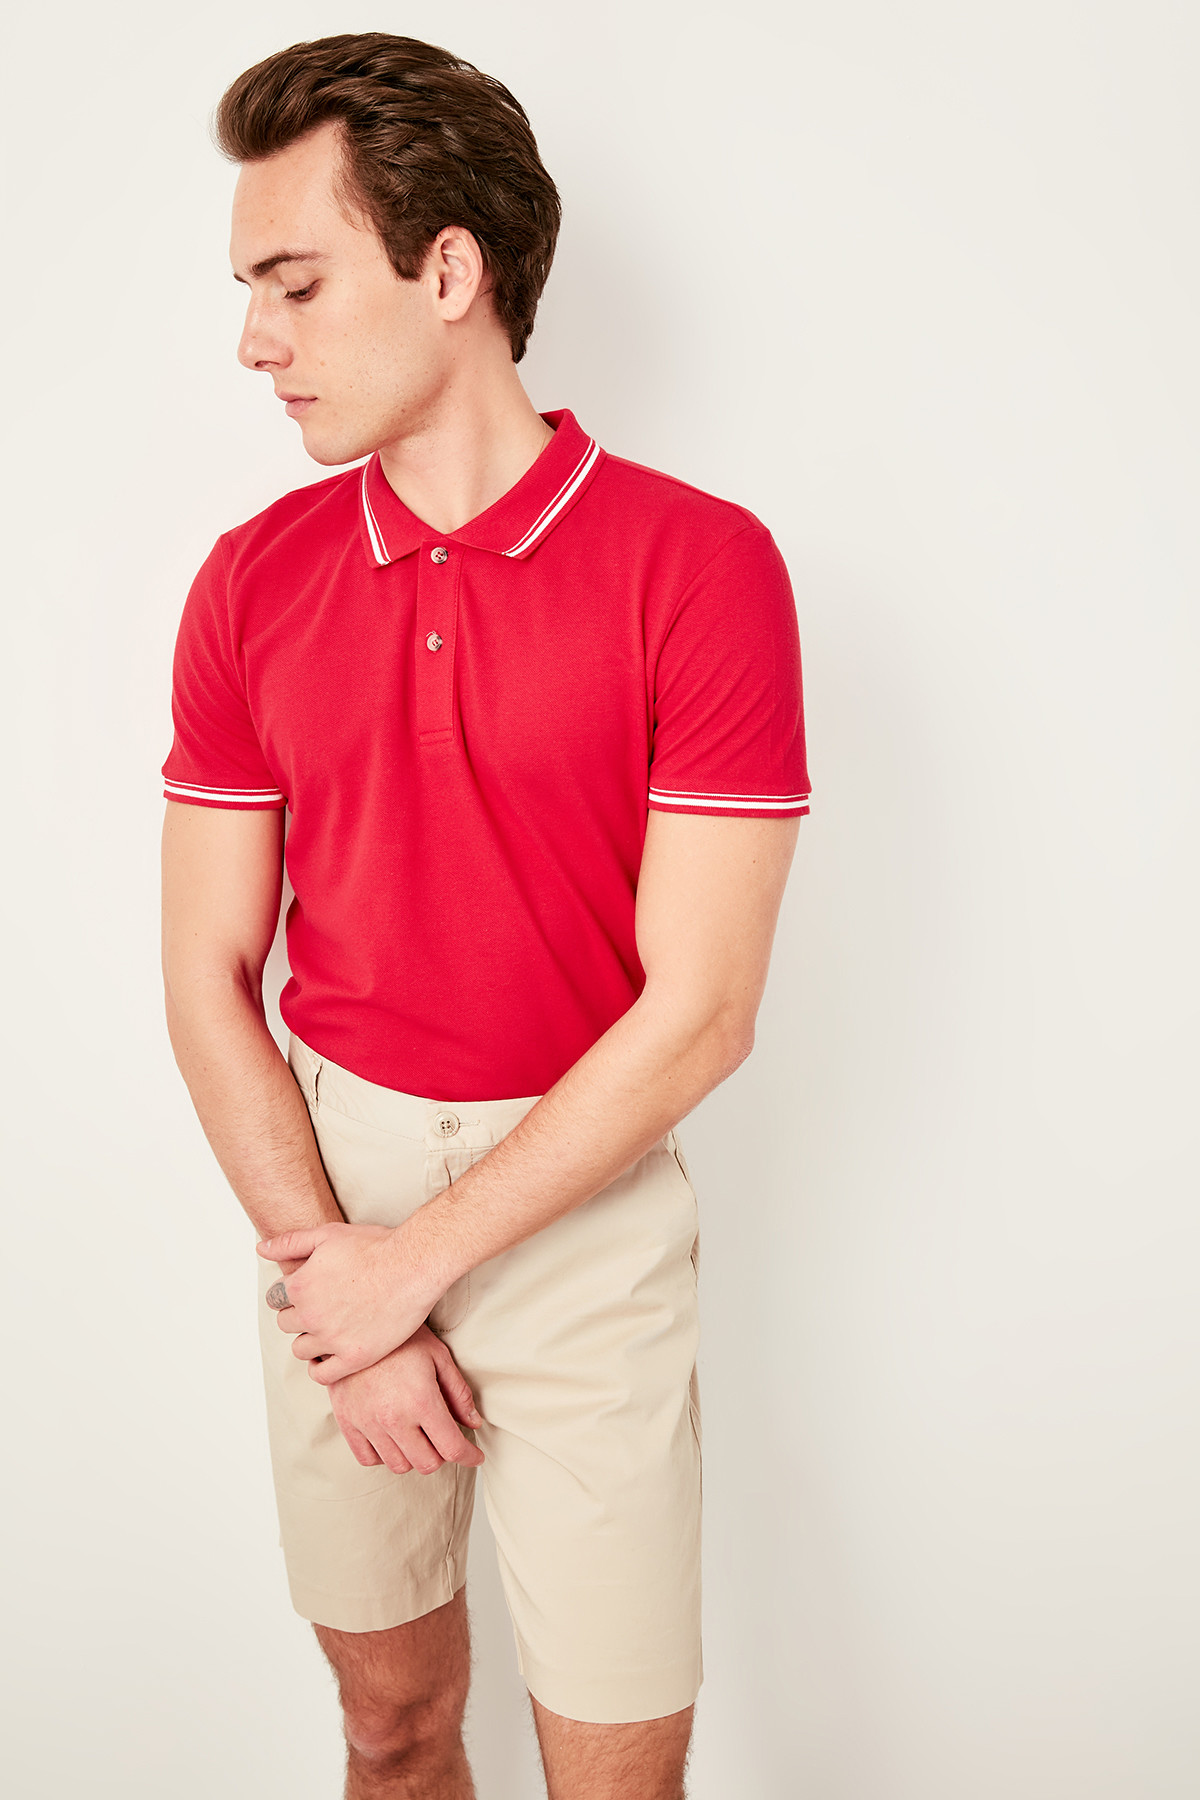 Trendyol Red mens cotton t-shirt-Checkers Knitted Belt Street-Style Polo collar t-shirt